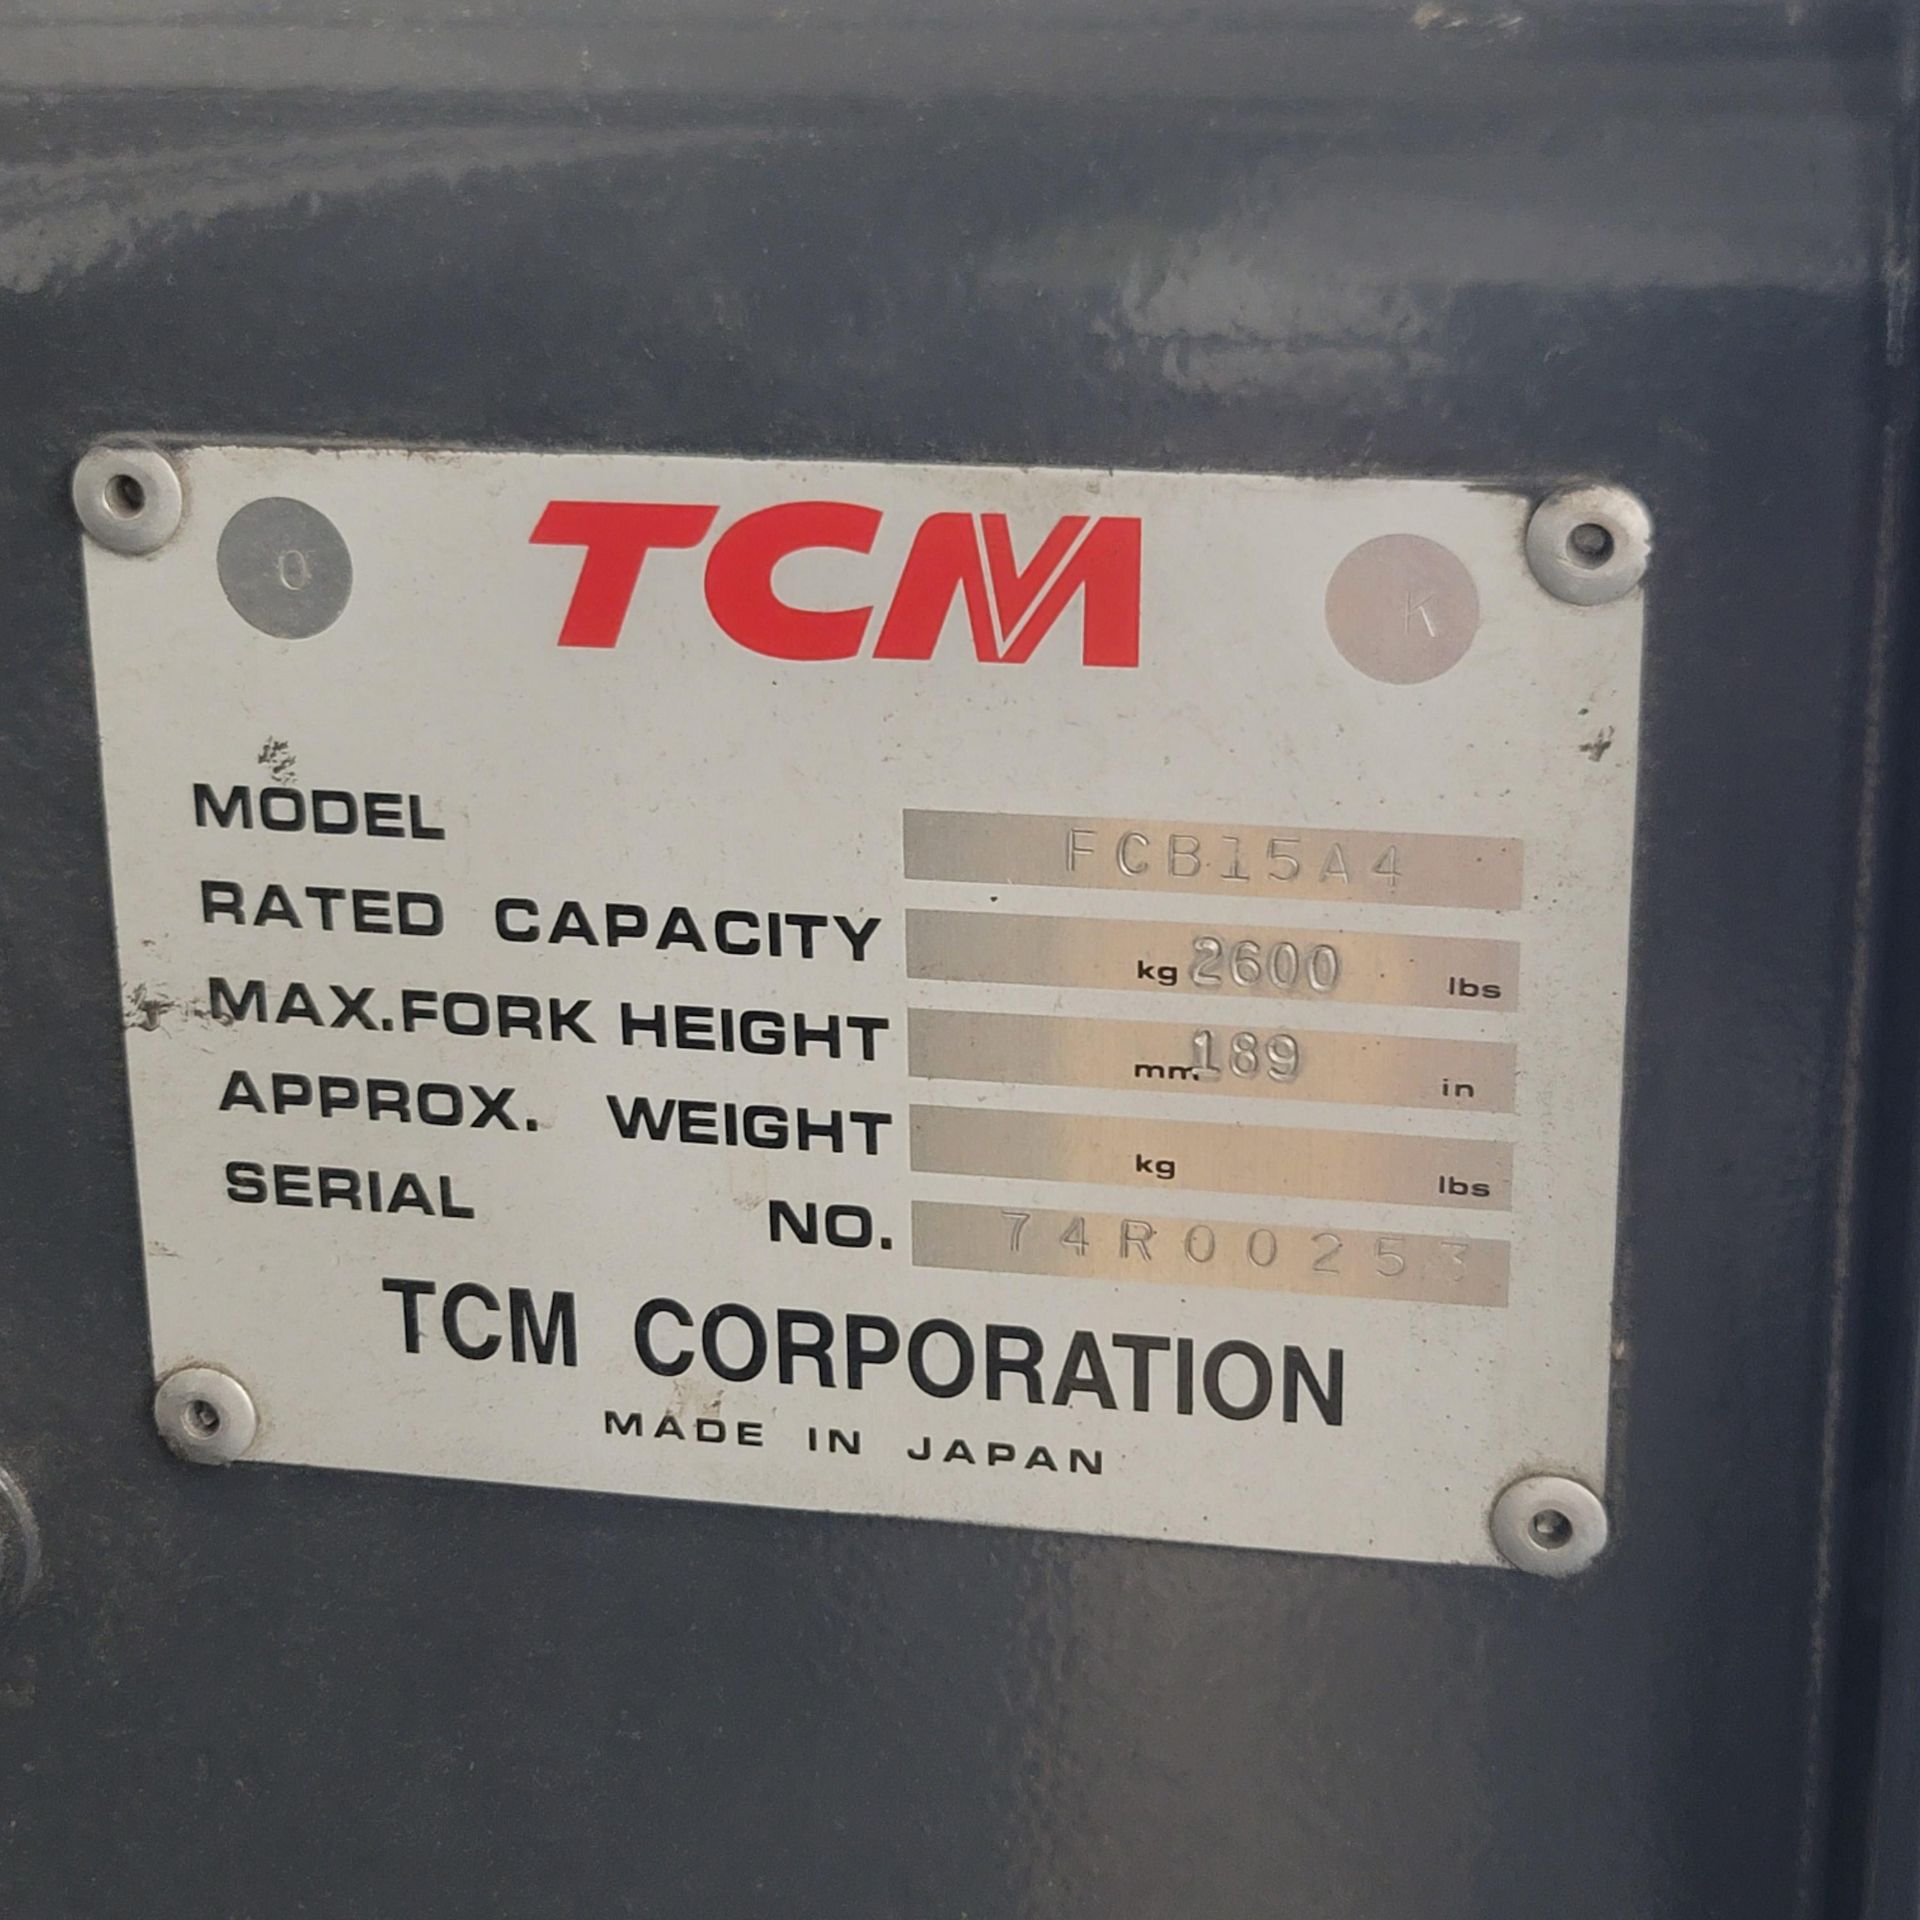 TCM ELECTRIC FORKLIFT, MODEL FCB15A4, 2,600 LB CAPACITY, APPROX. 6,208 HOURS, 3-STAGE MAST, SIDE - Image 9 of 16